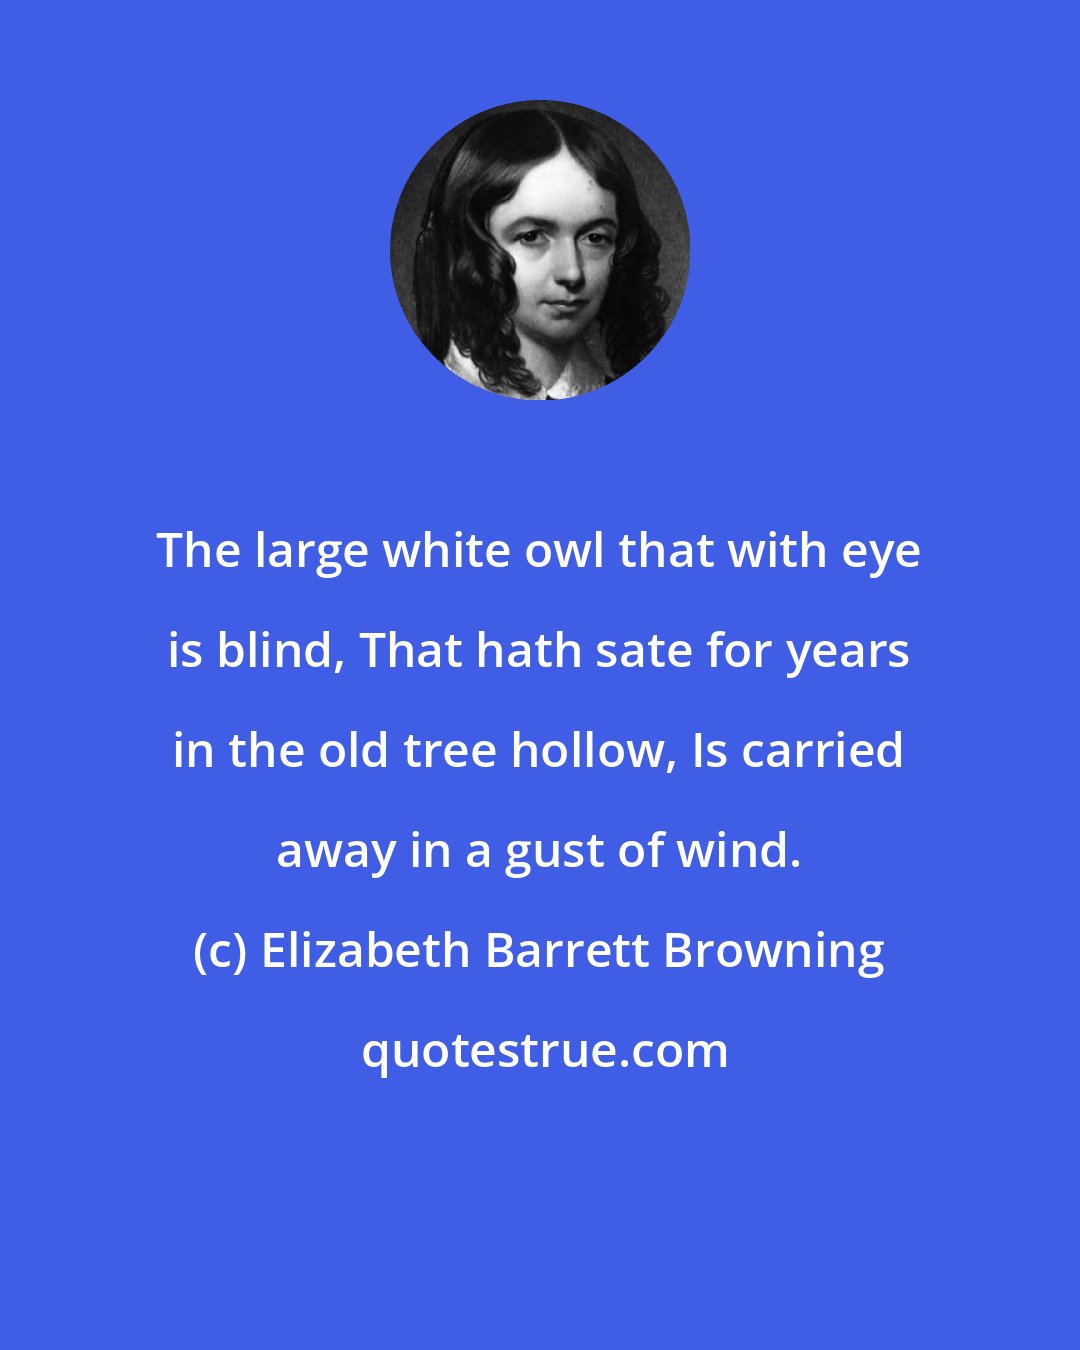 Elizabeth Barrett Browning: The large white owl that with eye is blind, That hath sate for years in the old tree hollow, Is carried away in a gust of wind.